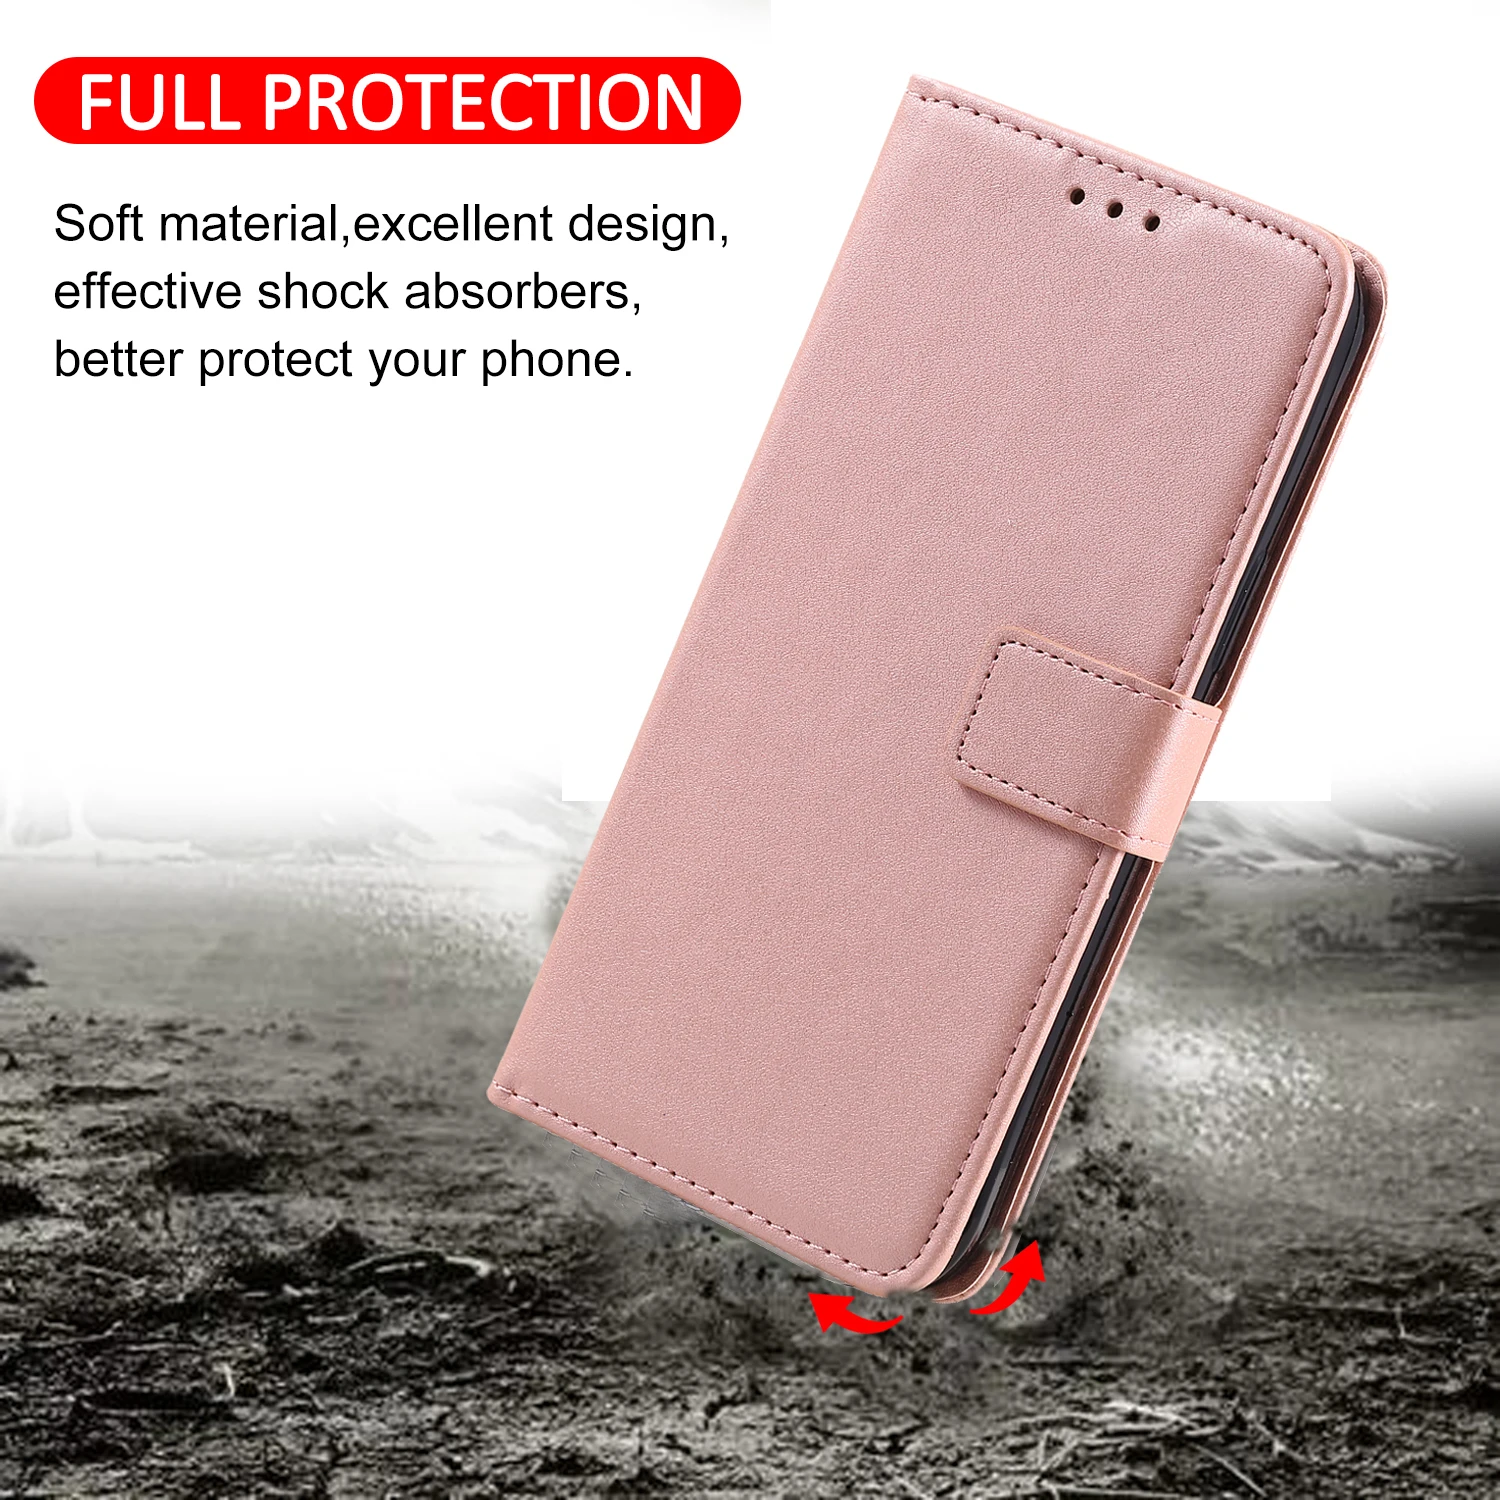 Leather Flip Cover For Moto G2 G4 G5 G6 Plus 2018 G5S X Play Z Force C E4  Card Slots Protection Case Holder Stand Soft Sling - AliExpress